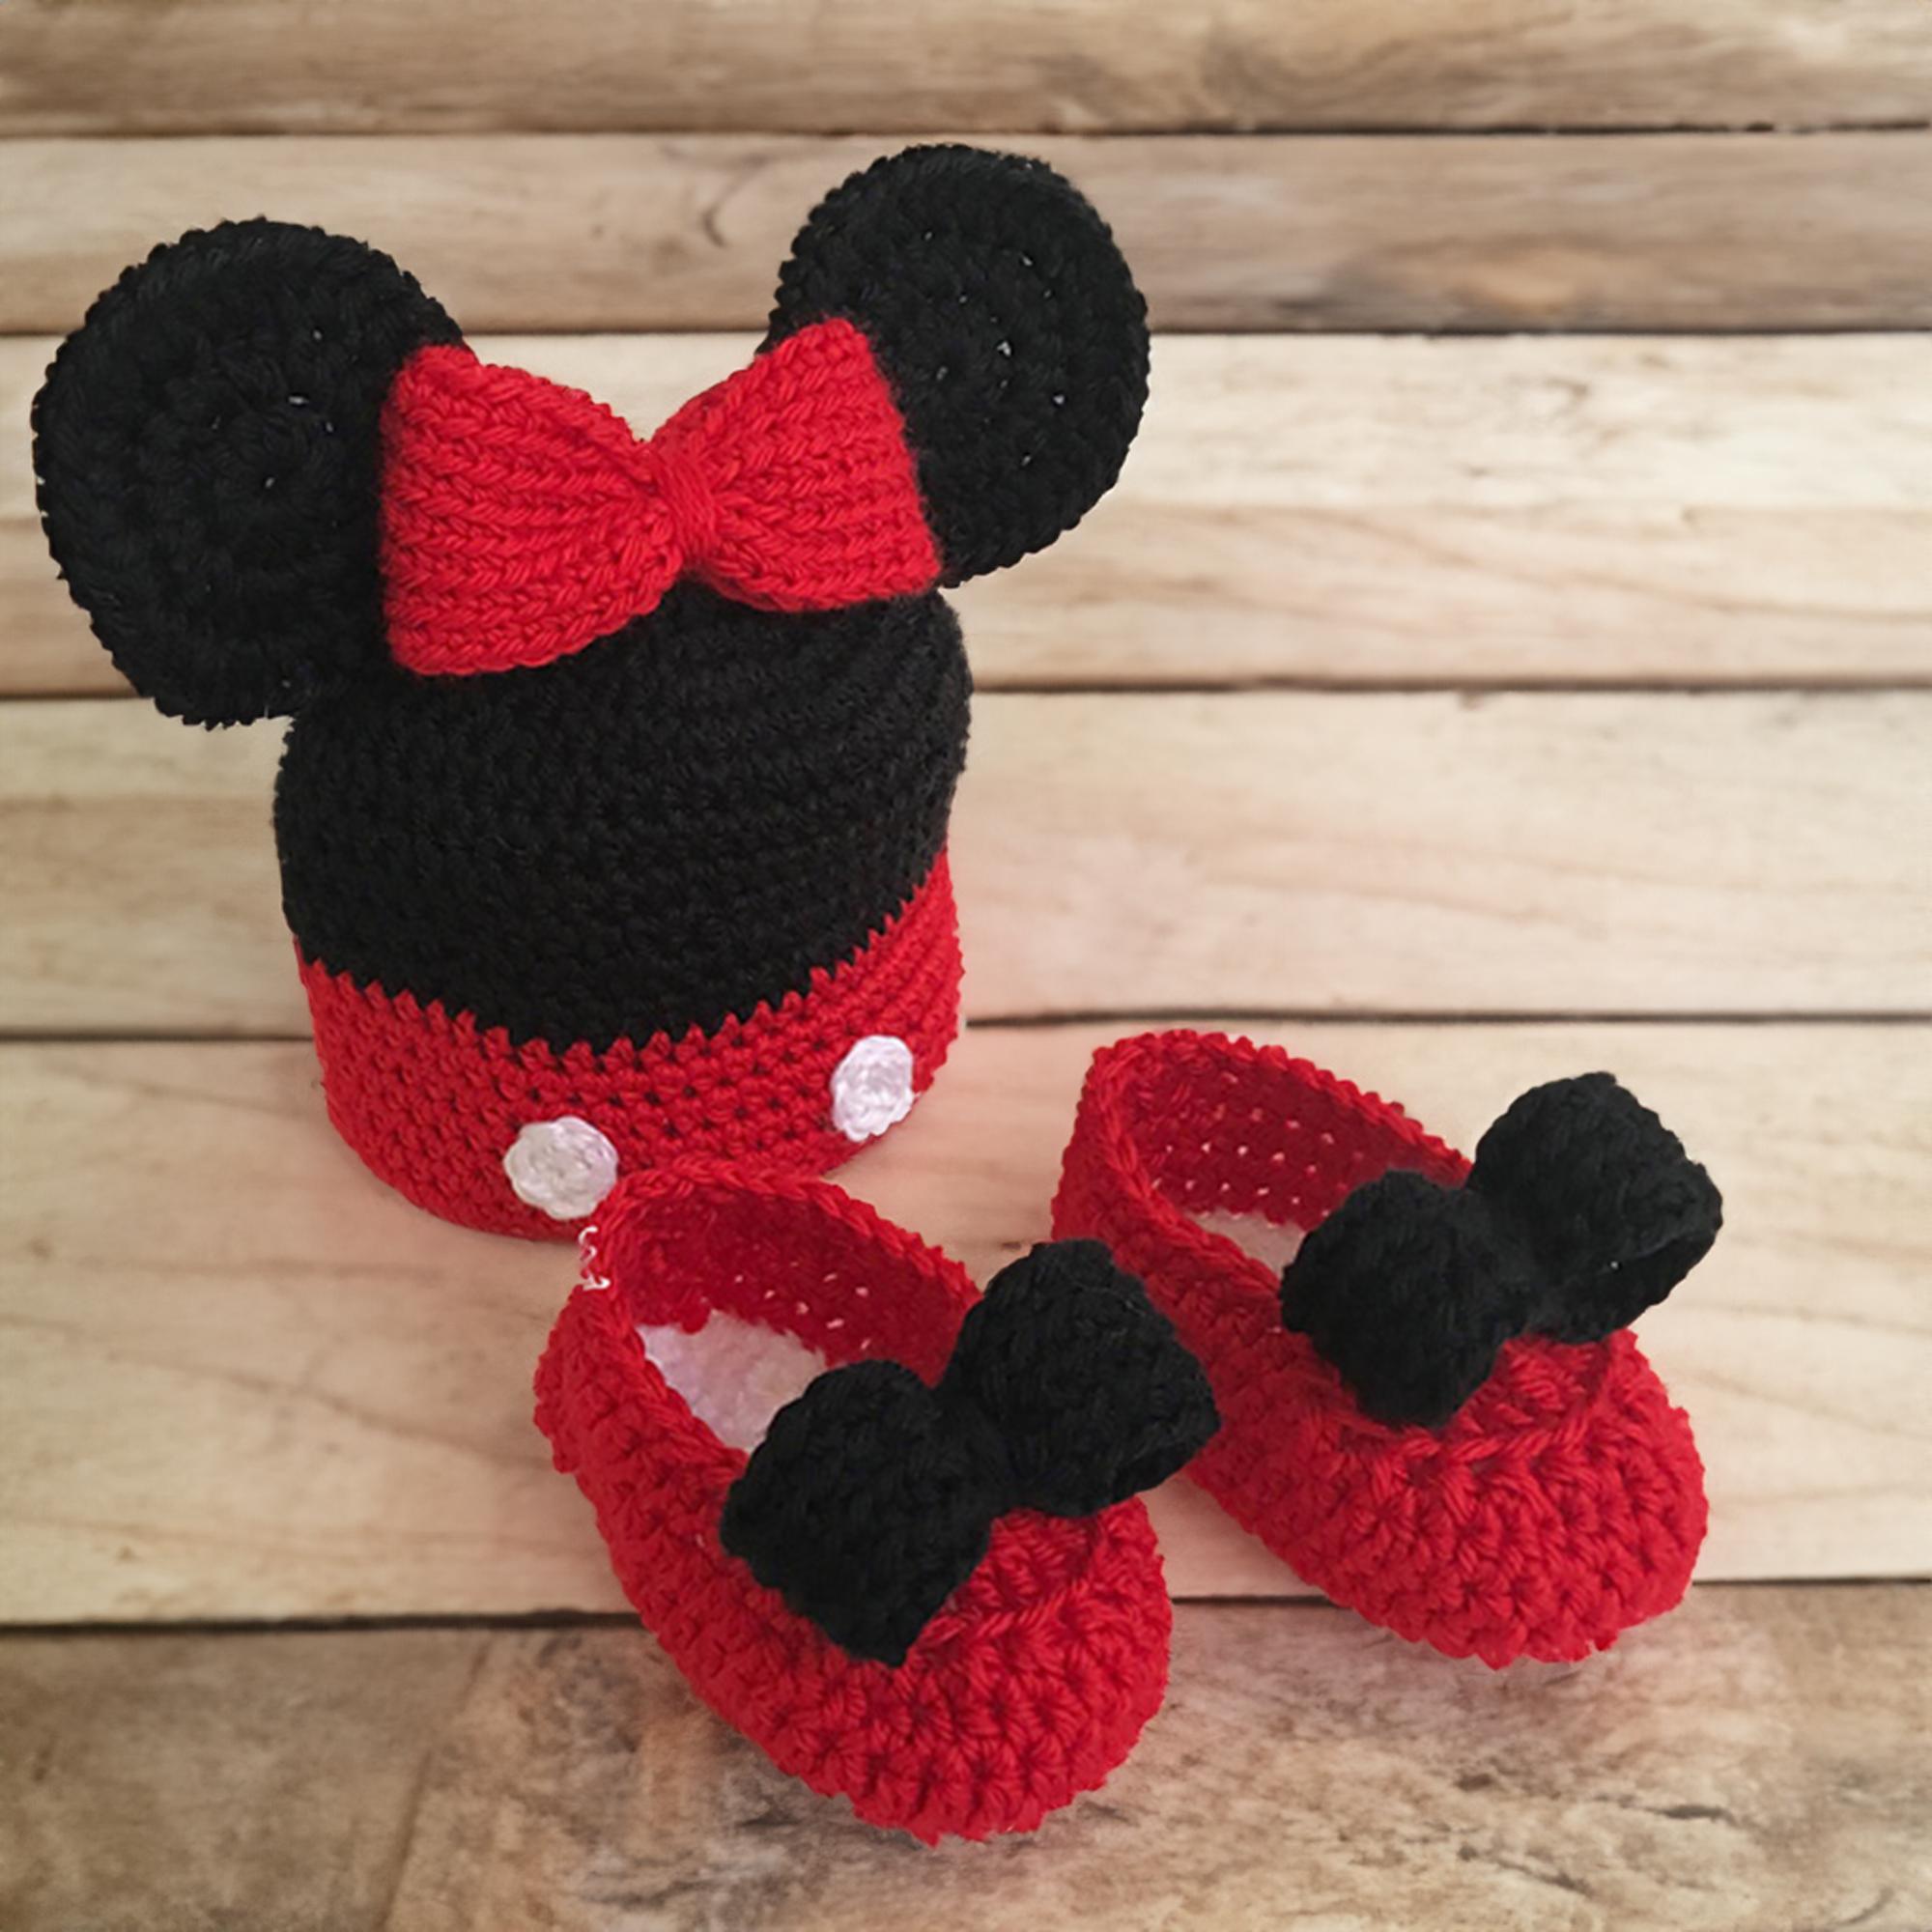 Merry Mouseketeer: Handcrafted Disney-Inspired Ensemble